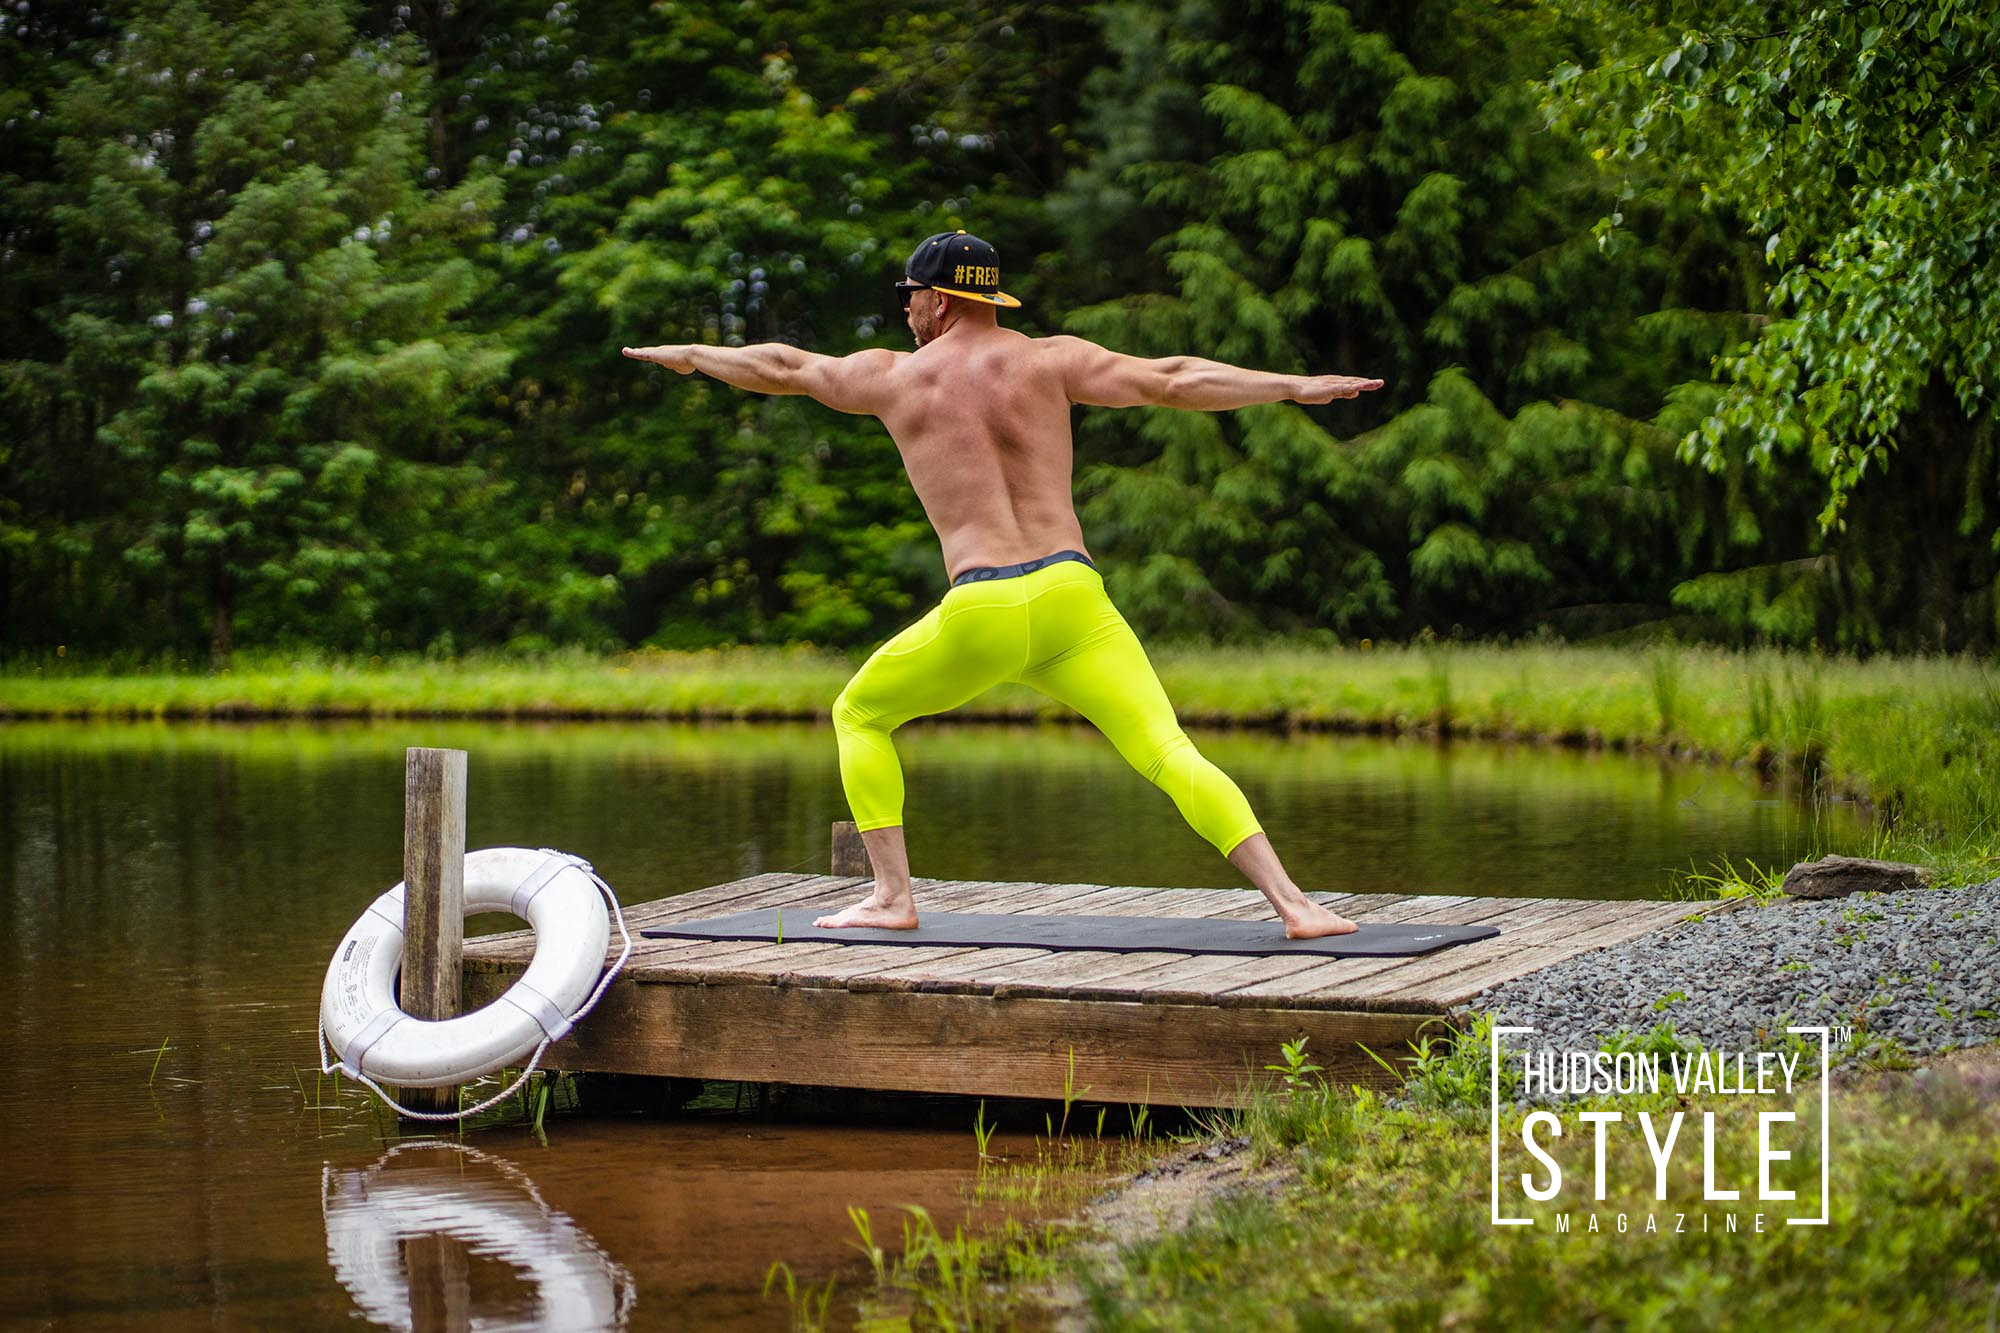 Style, Substance, and Sun Protection: Why ATHLIO Men's Workout Leggings Are a Must-Have – Product Reviews with Fitness Model/Bodybuilding Coach Maxwell Alexander – Men's Yoga Pants Review